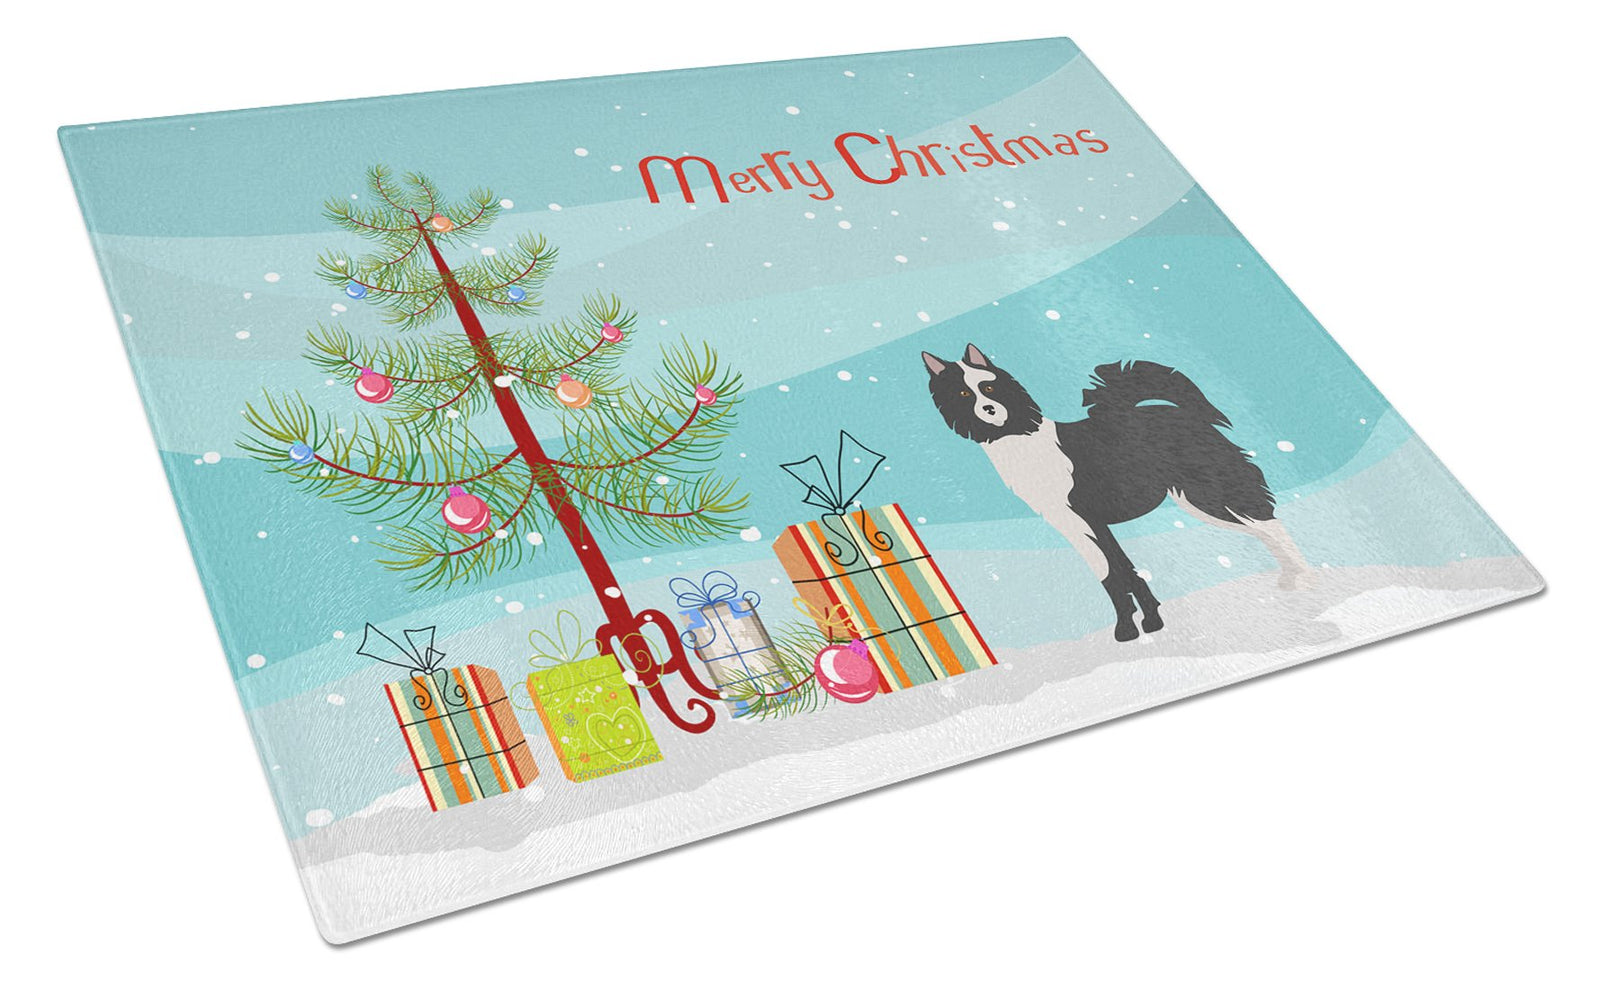 Black and White Elo dog Christmas Tree Glass Cutting Board Large CK3452LCB by Caroline's Treasures